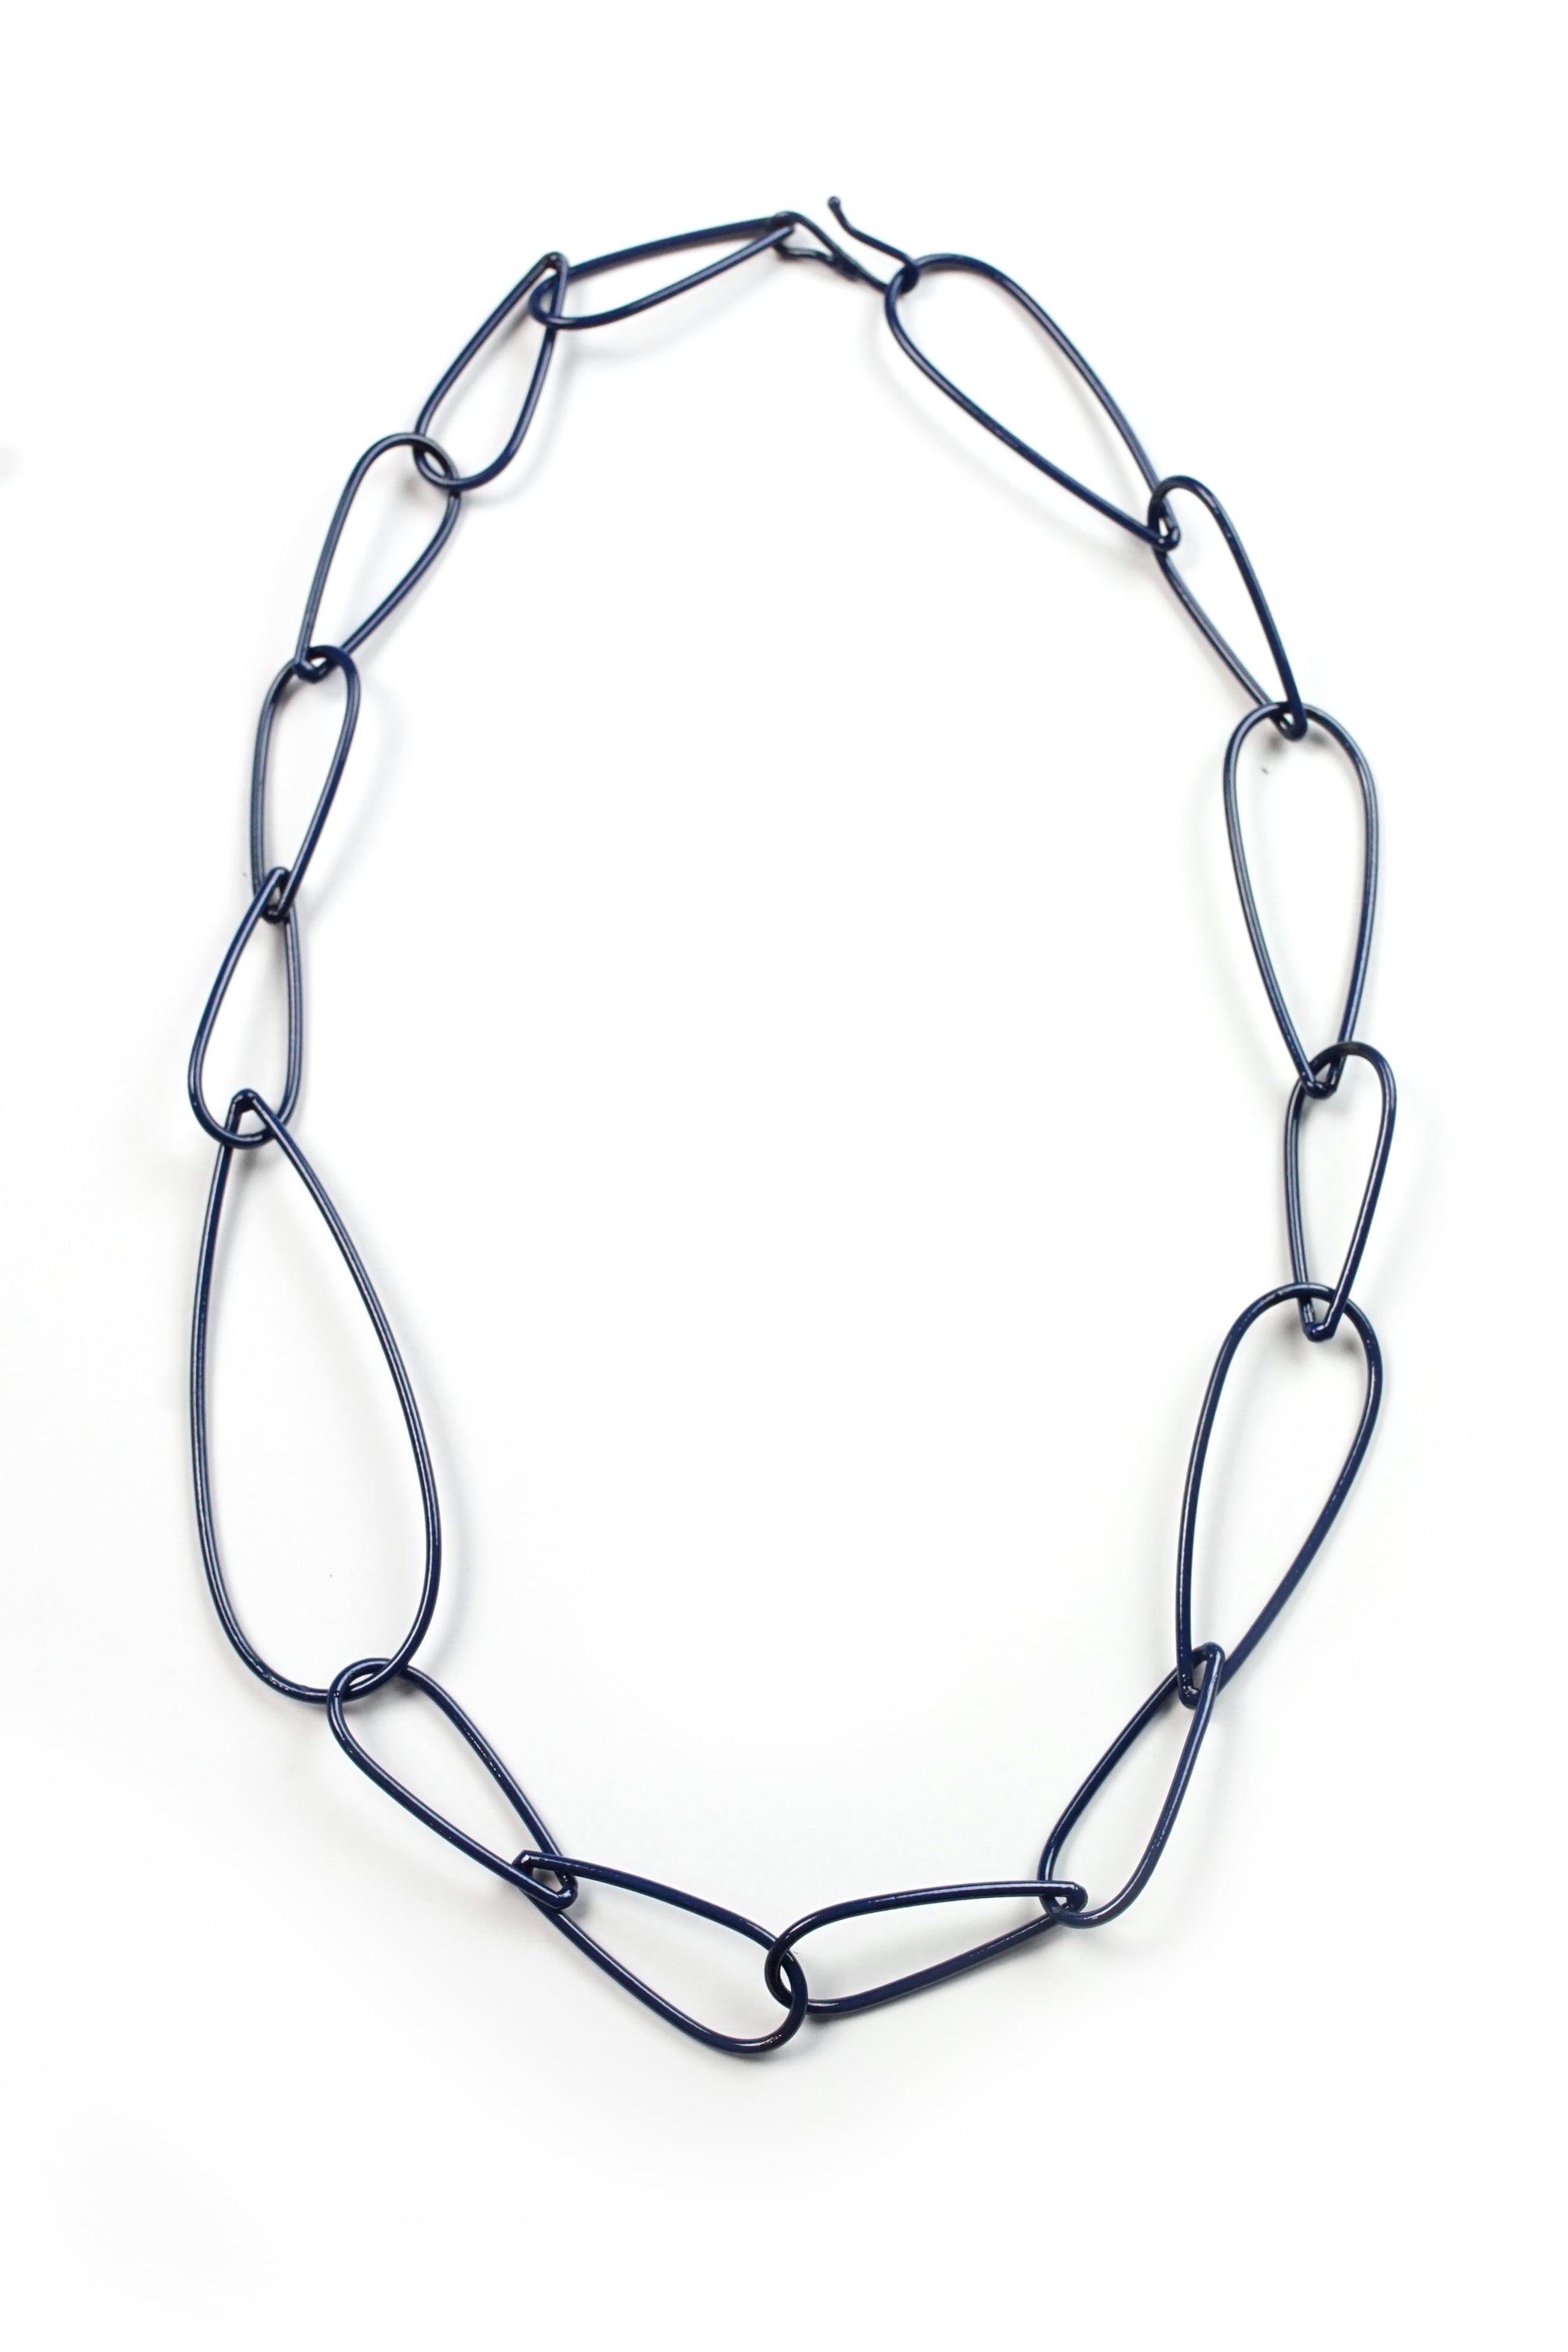 Modular Necklace No. 4 in Blue Sapphire